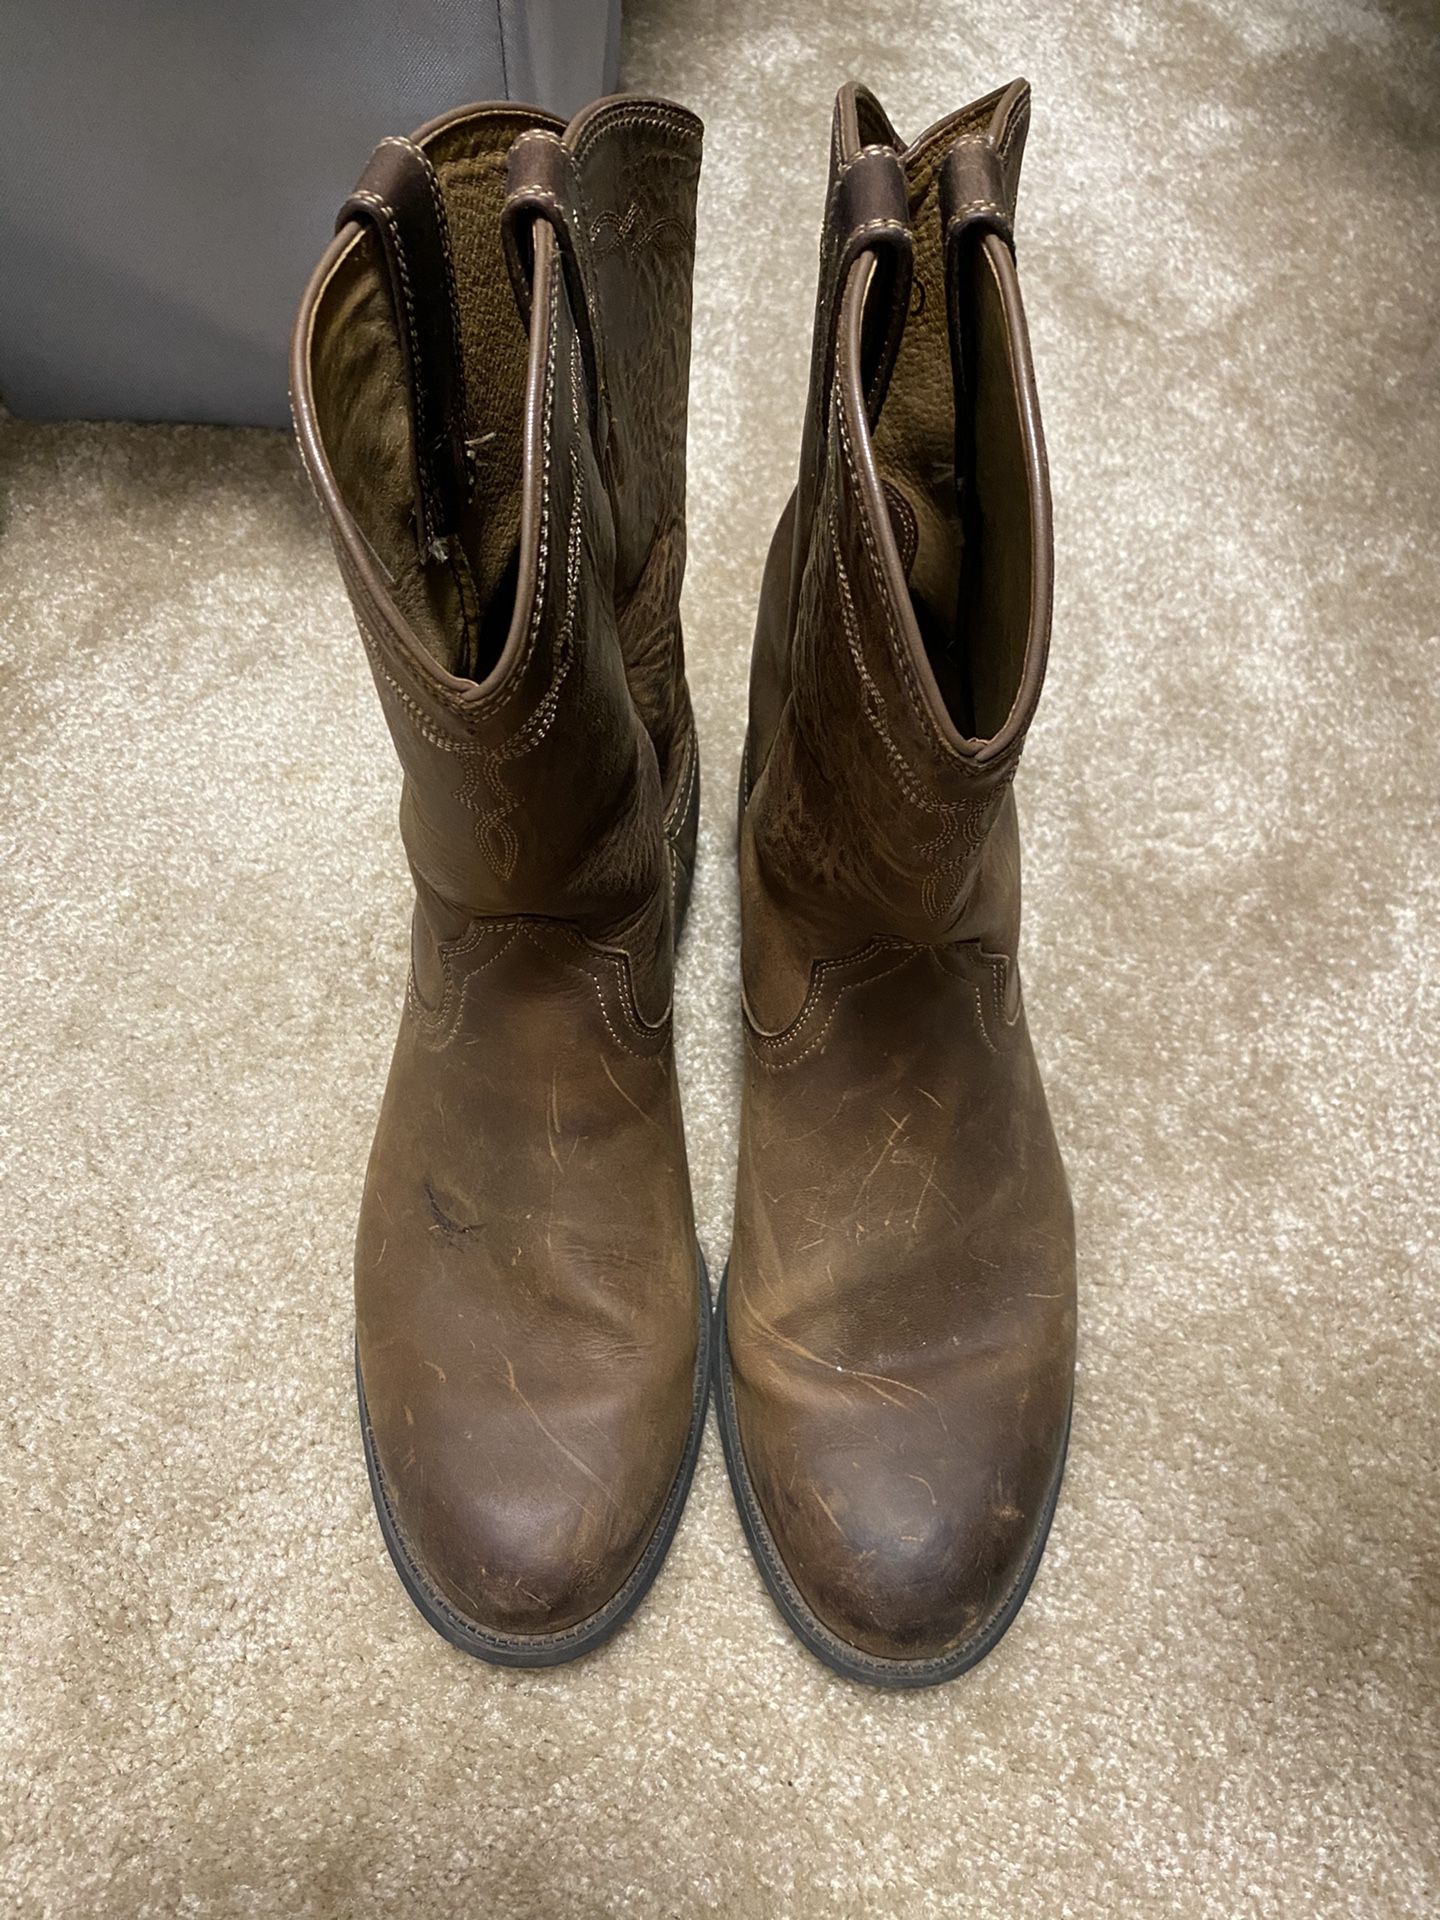 Ariat Boots lightly used great condition 12 wide